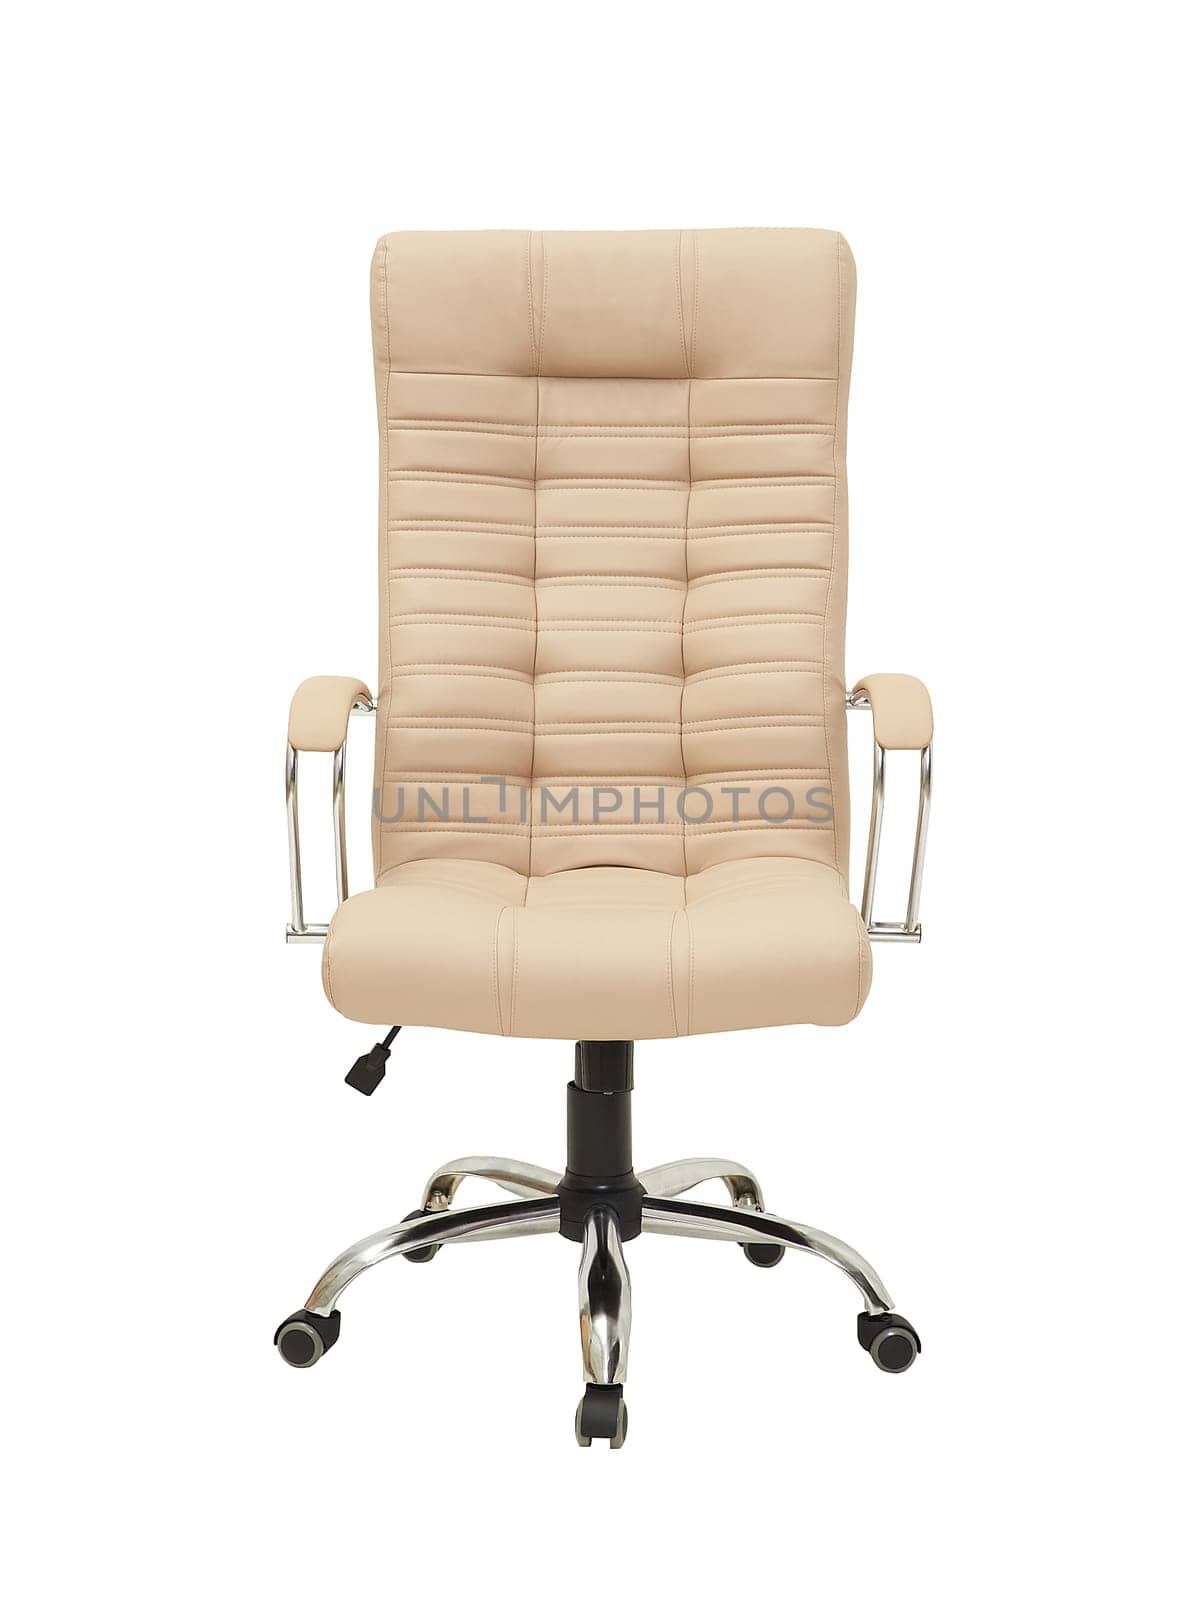 beige office leather armchair on wheels isolated on white background, front view. modern furniture, interior, home design